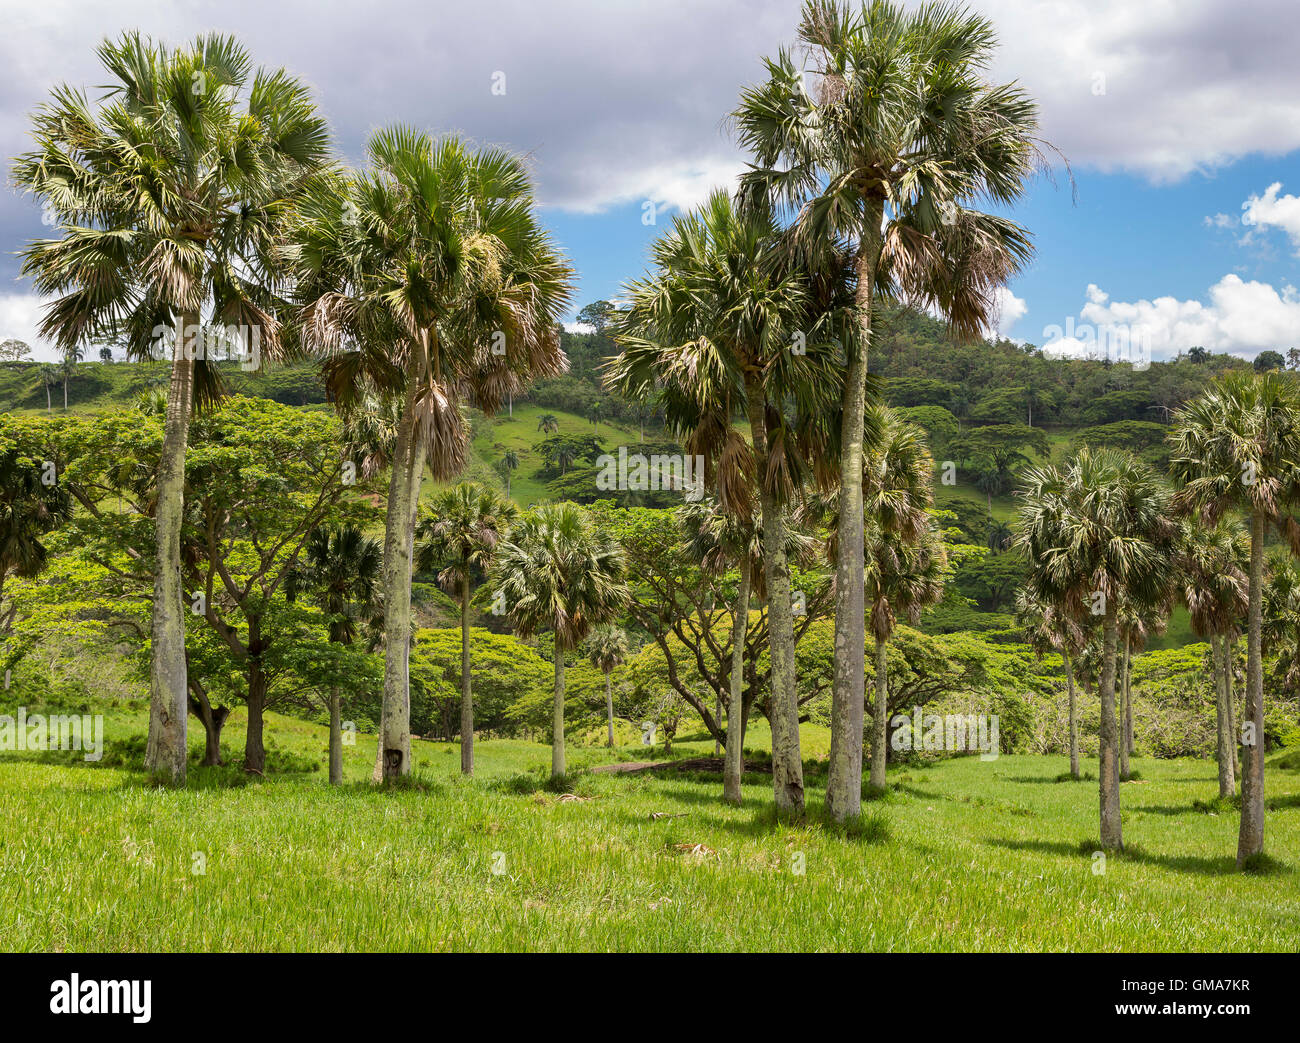 DOMINICAN REPUBLIC - Landscape in mountains, private land for grazing, northern DR, on Route 21. Stock Photo